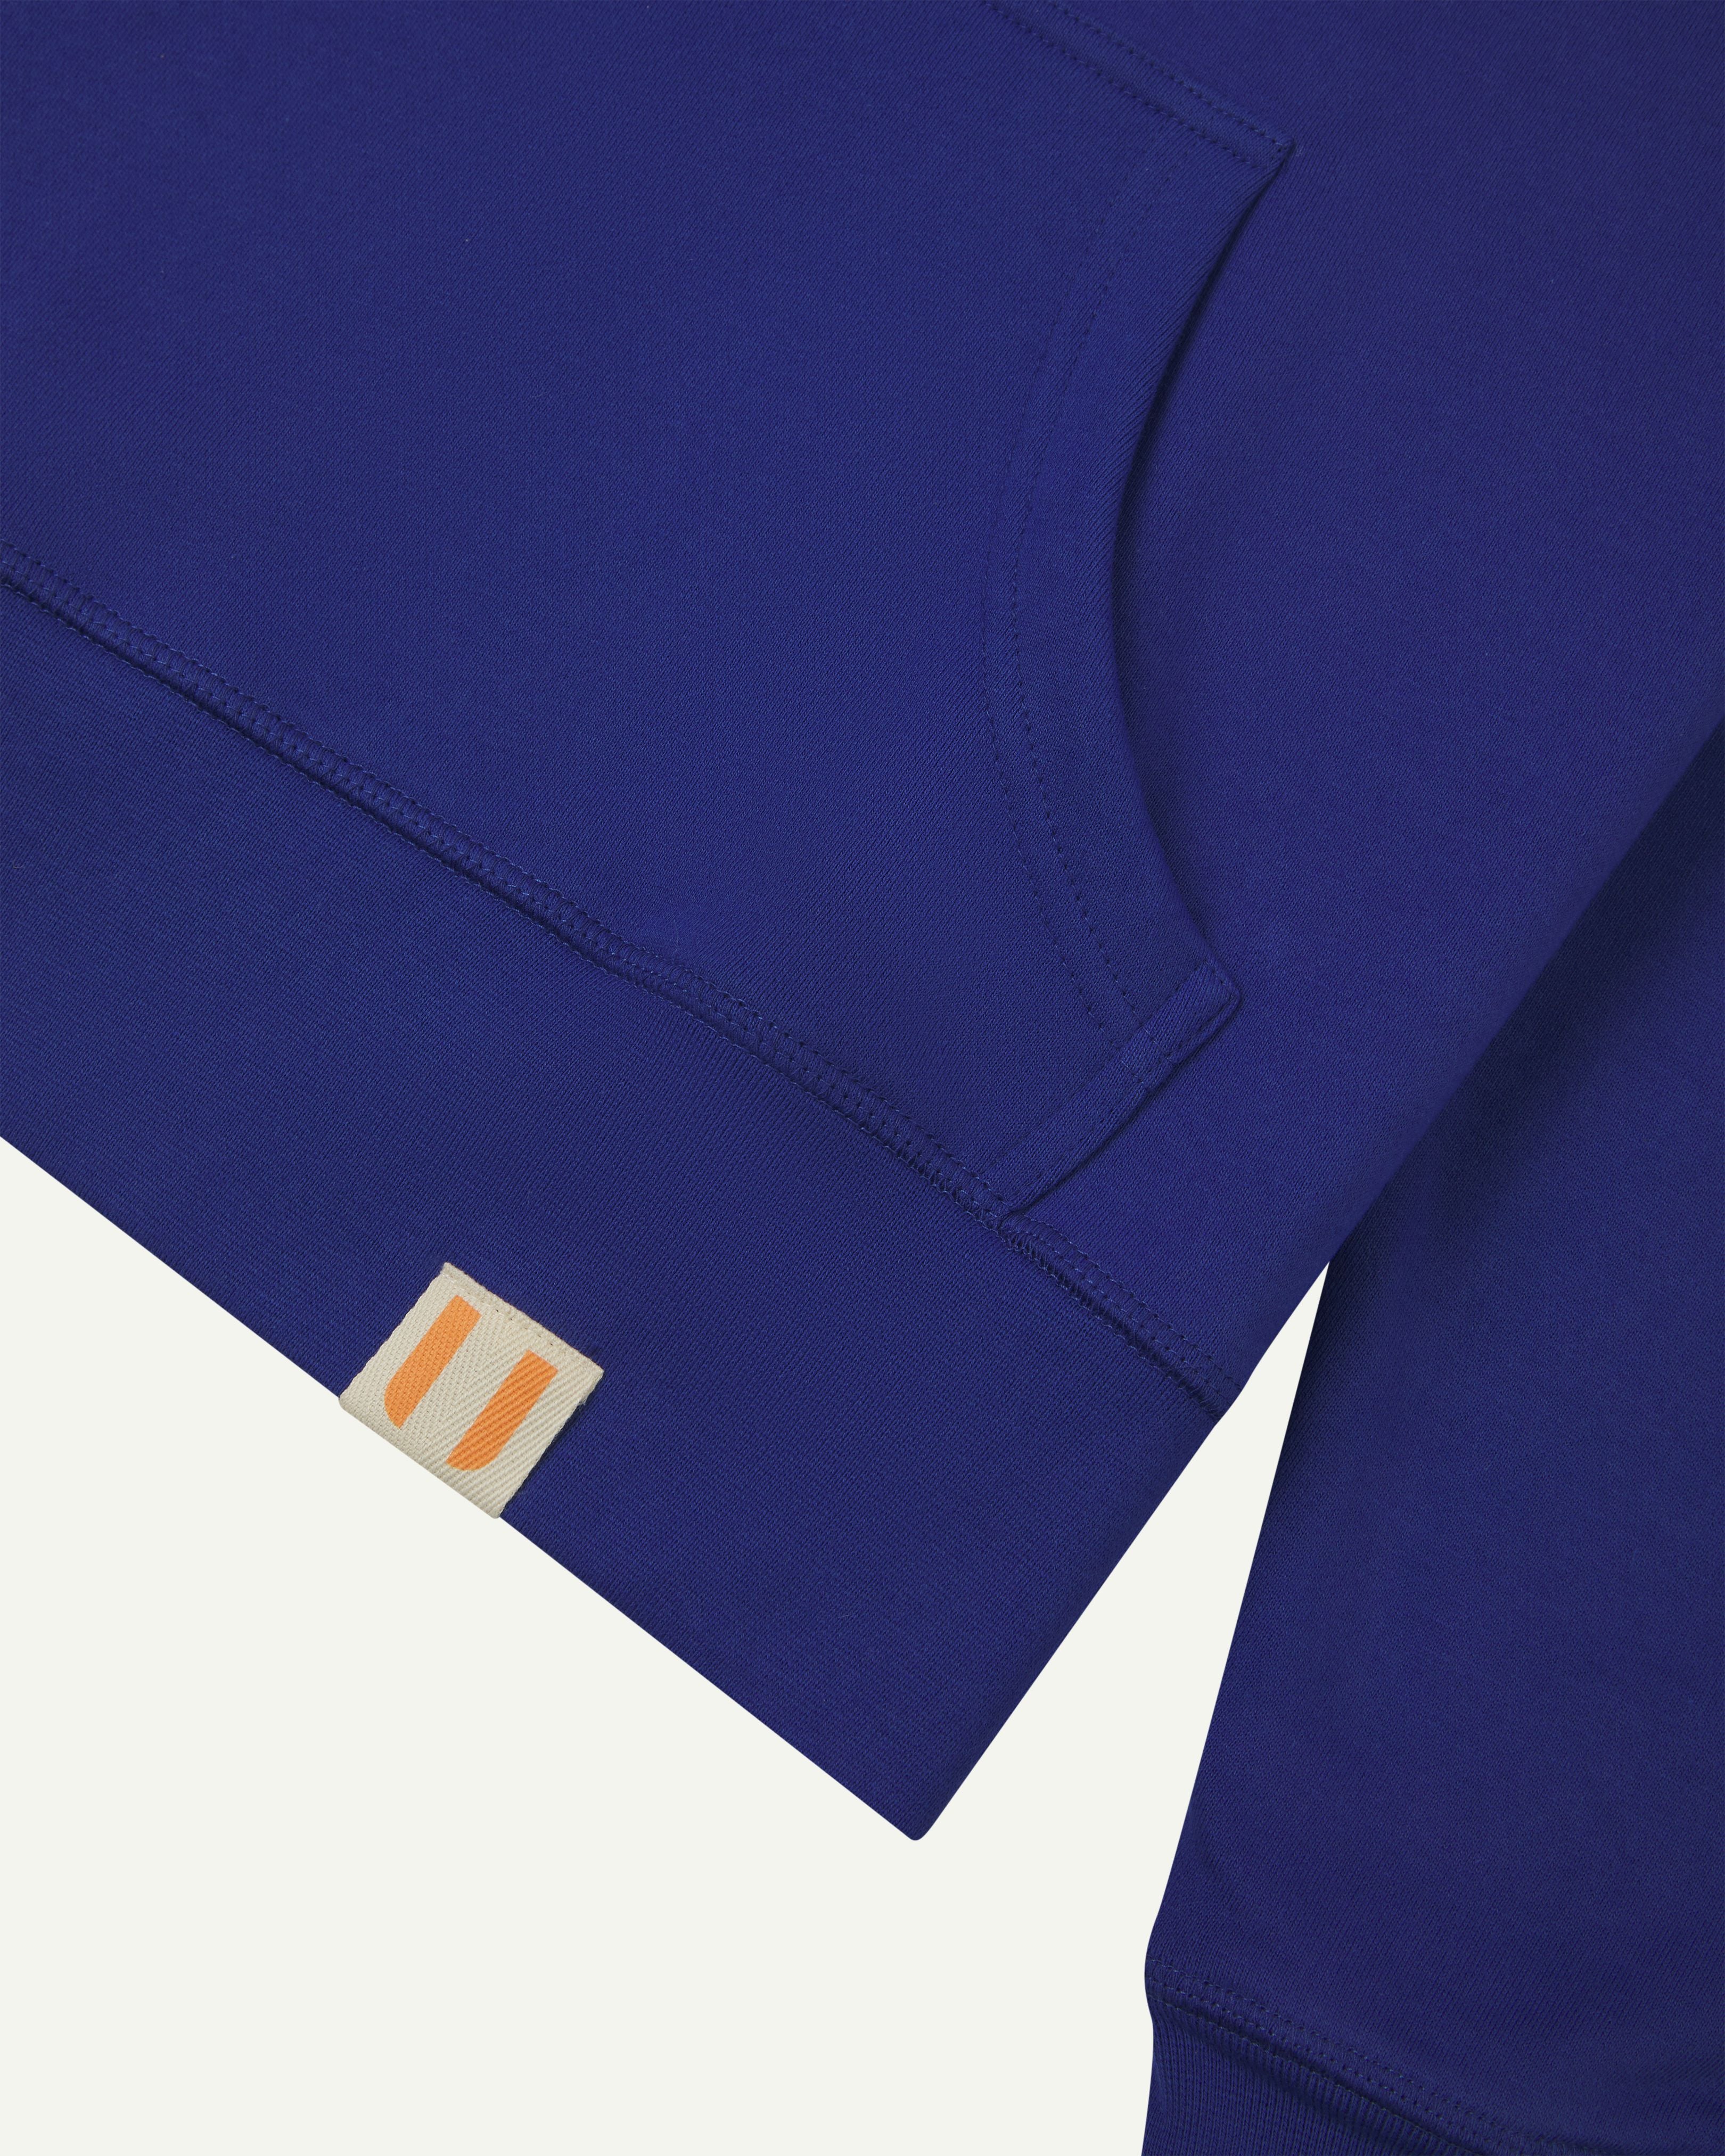 Front pocket detail view of vivid ultra blue organic cotton #7004  hooded sweatshirt by Uskees